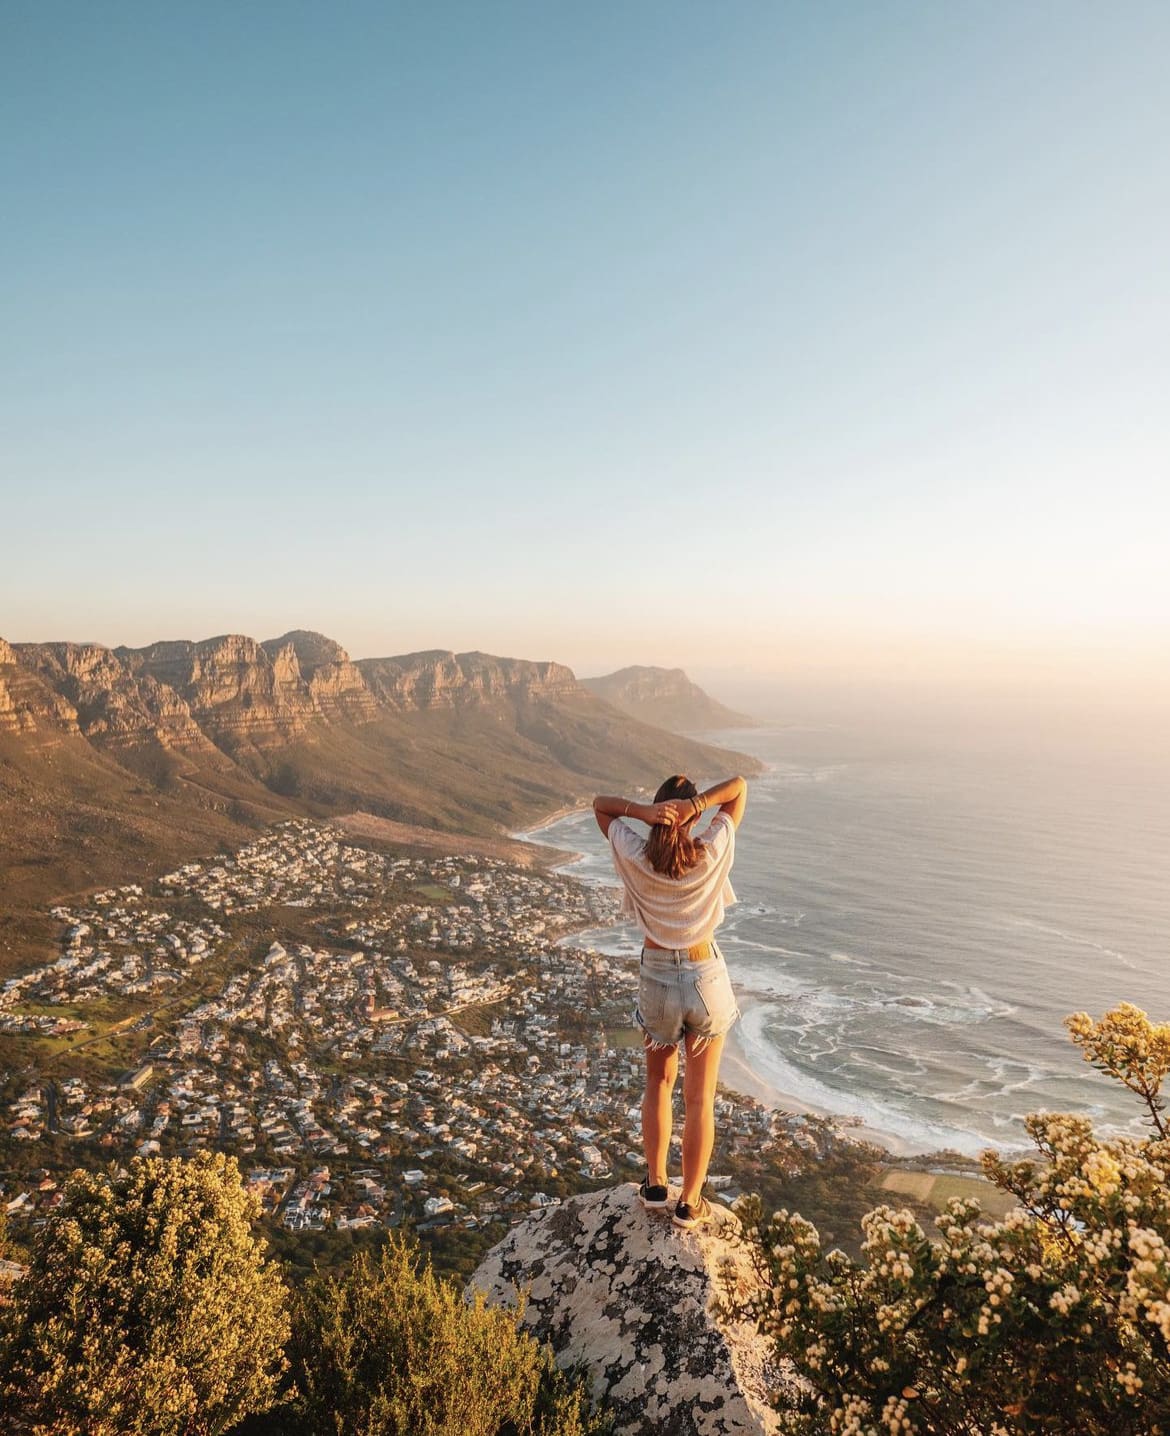 Taking in the views over the Mother City